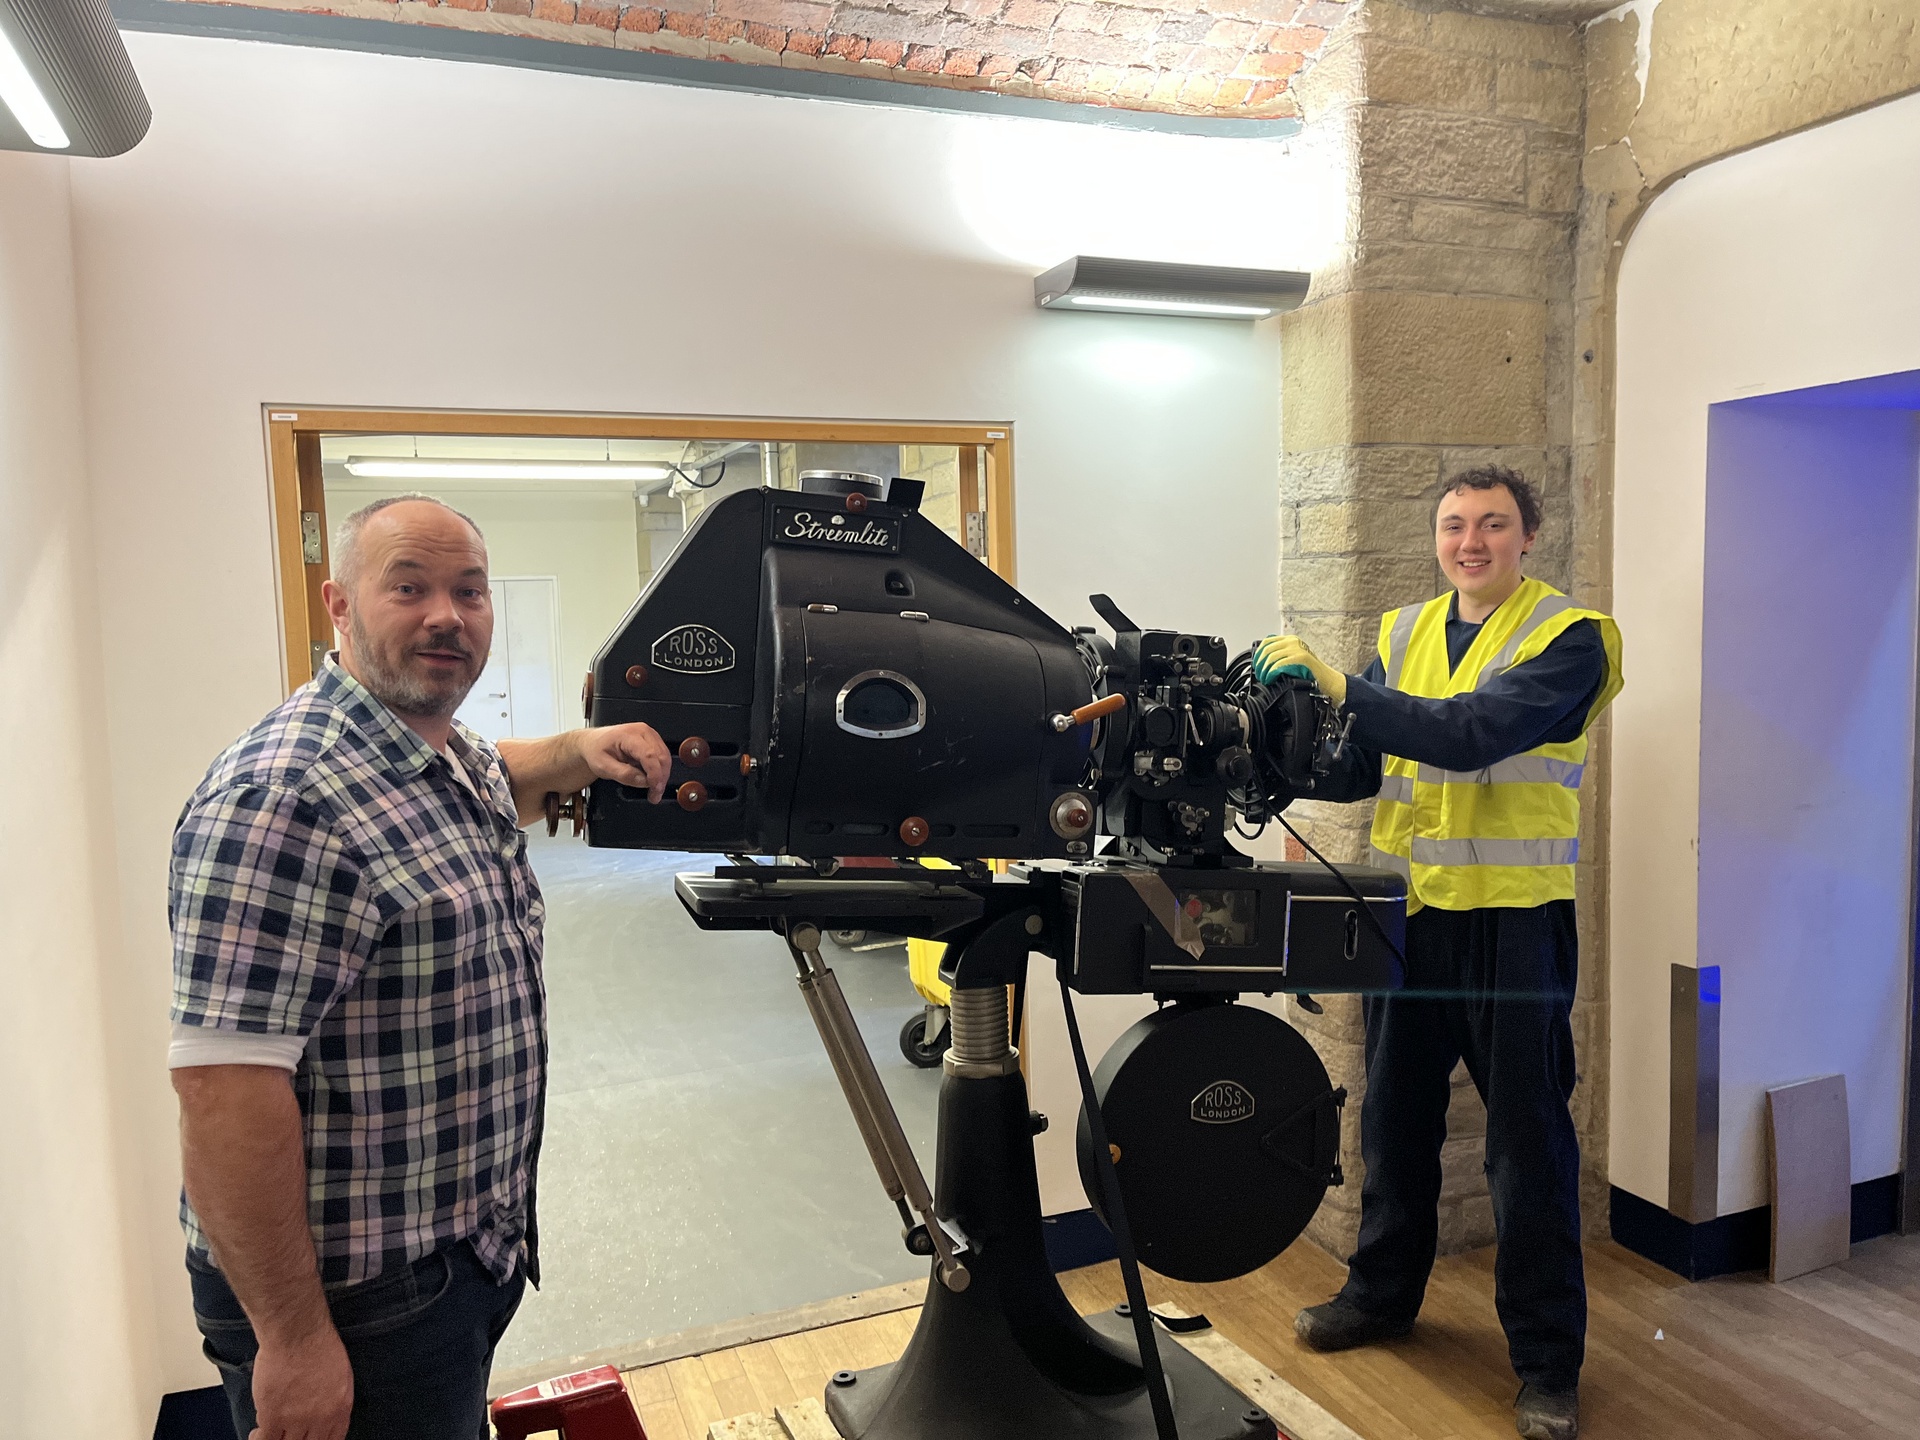 PPT Curator Alex Cooper, and PPT member Jacob Pearson, moving a Ross projector.